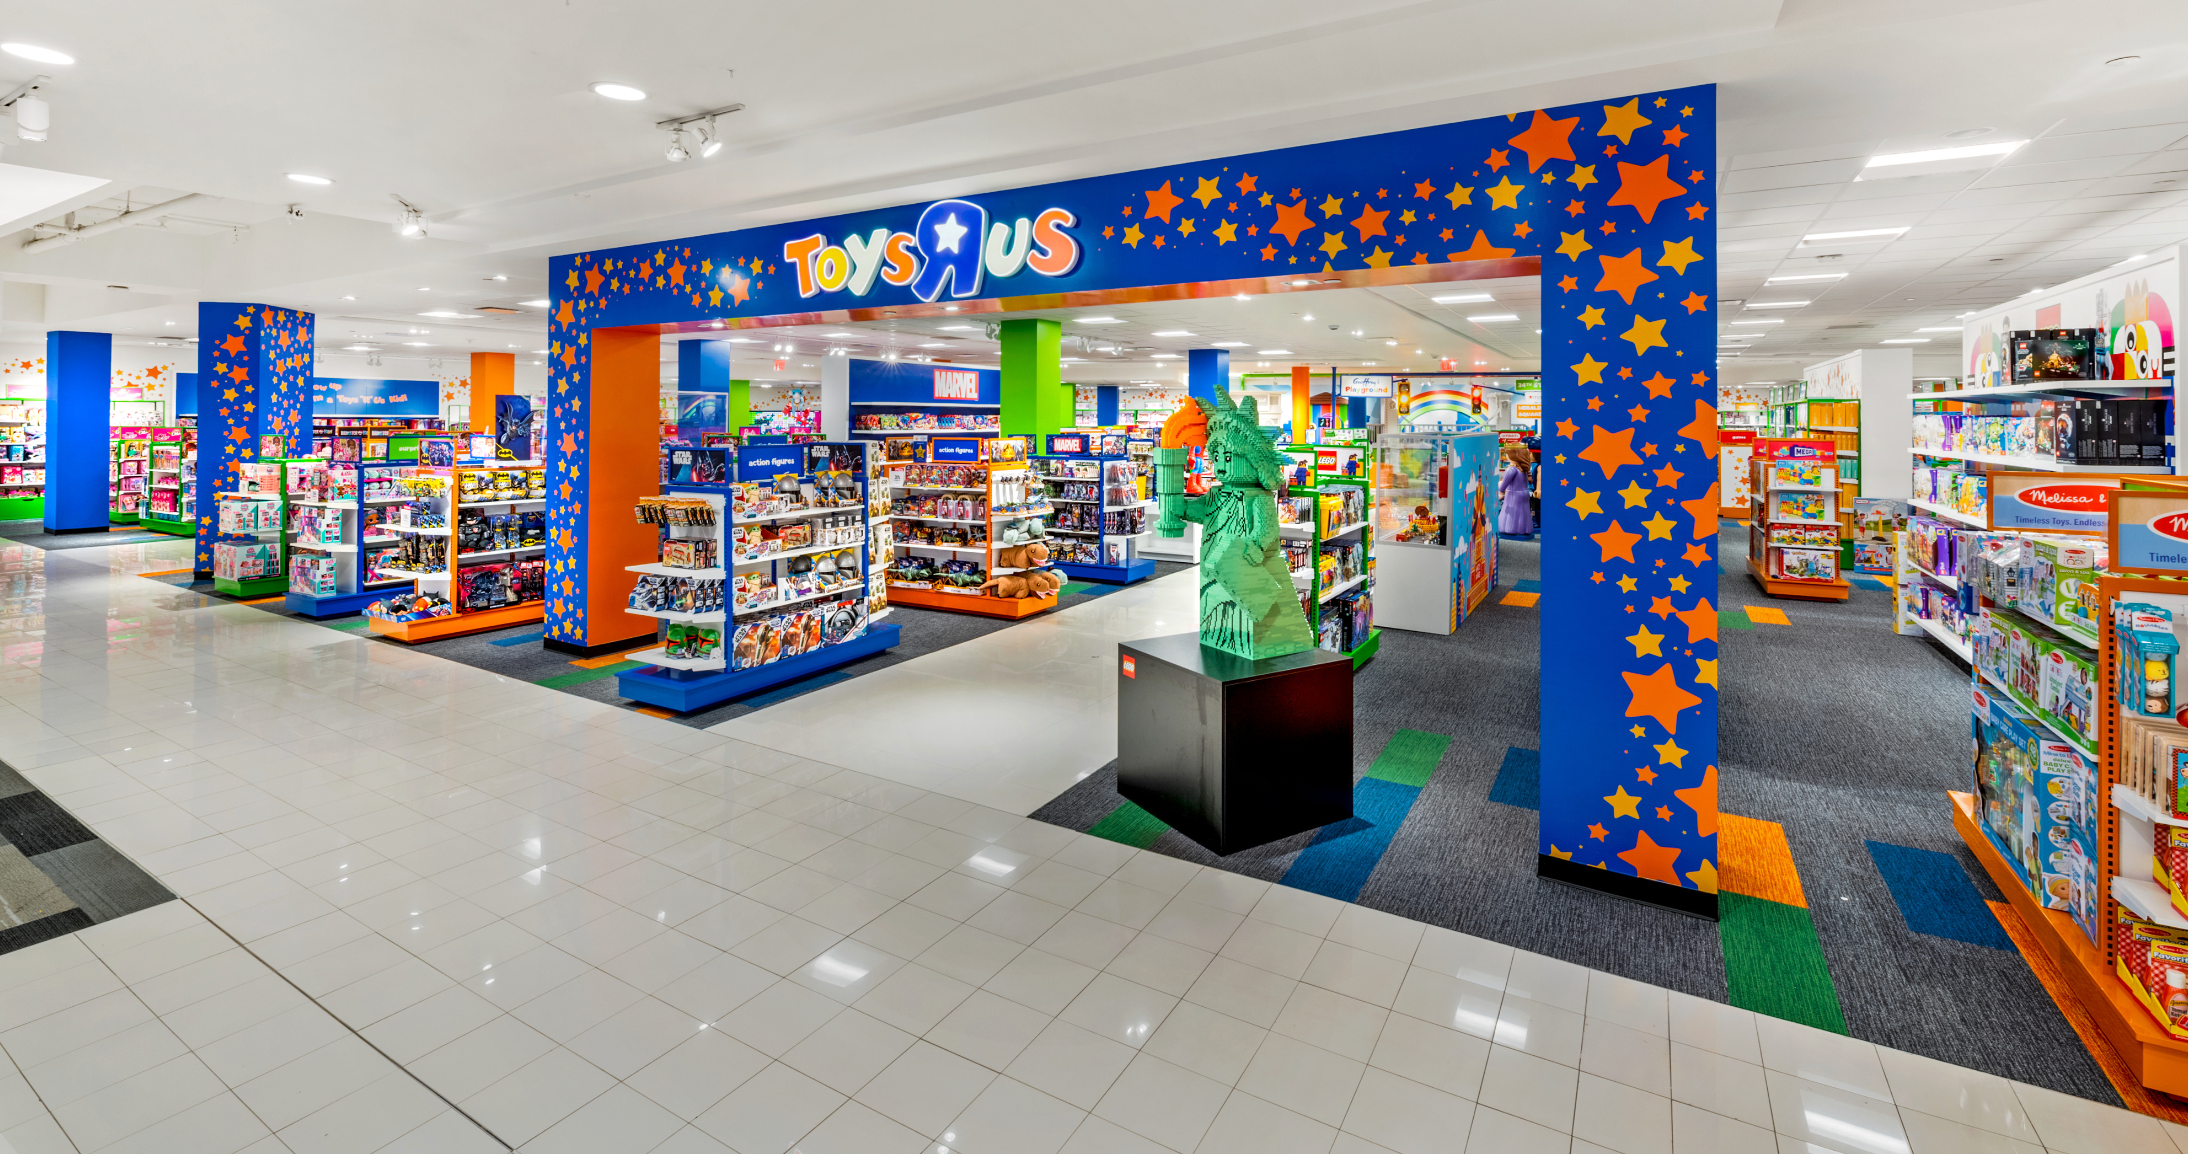 Babies R Us makes a comeback with new US flagship store